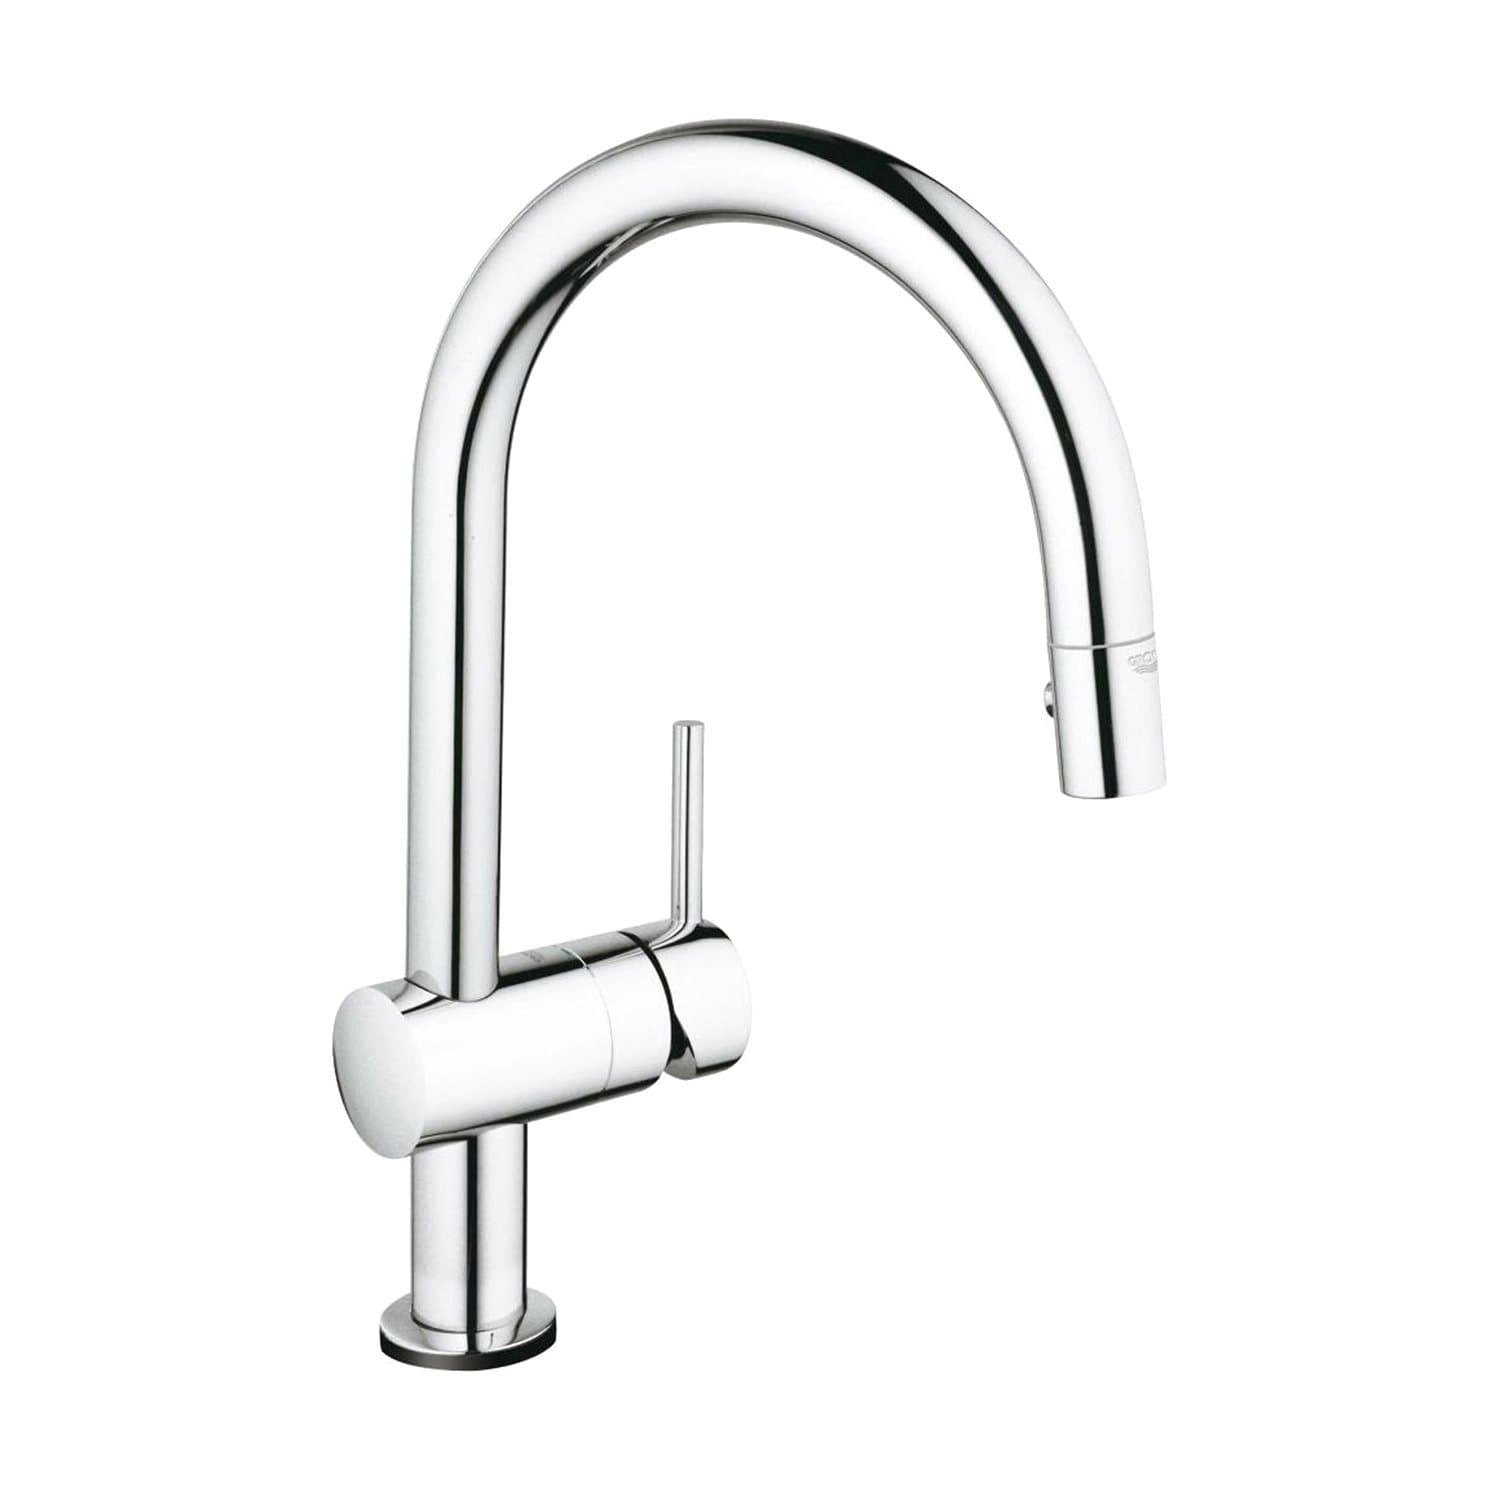 GROHE MINTA TOUCH SINK C-SPOUT PULL-OUT SPRAY